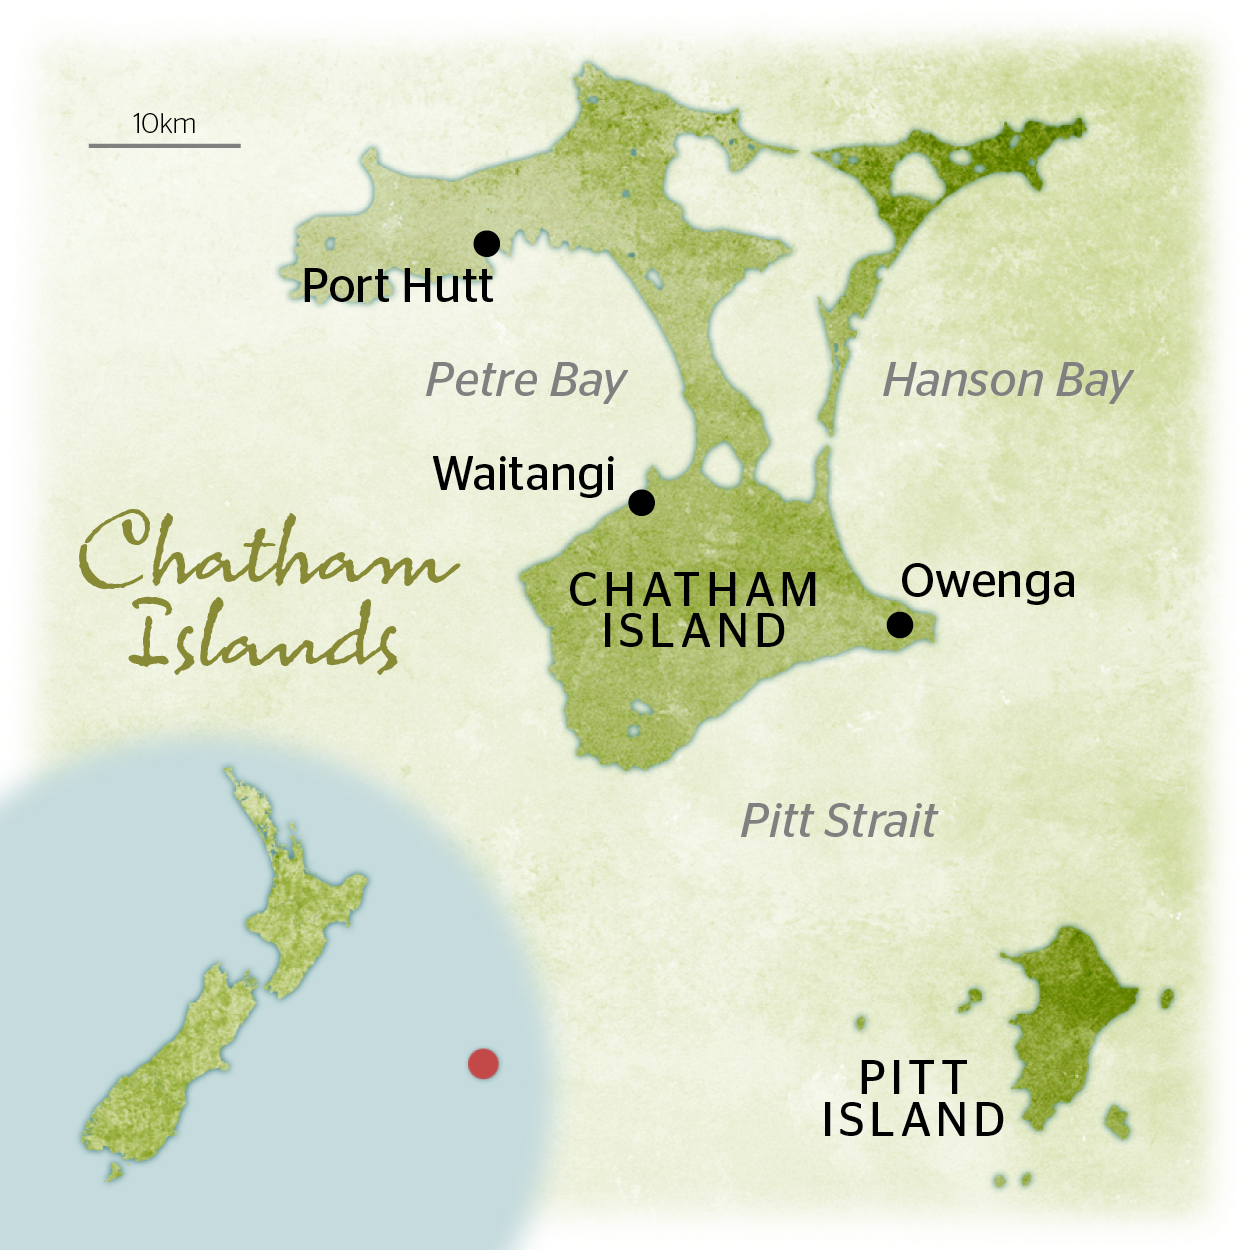 Remote Access An Inside Look At The Lives And Landscapes Of The Chatham Islands Nz Herald